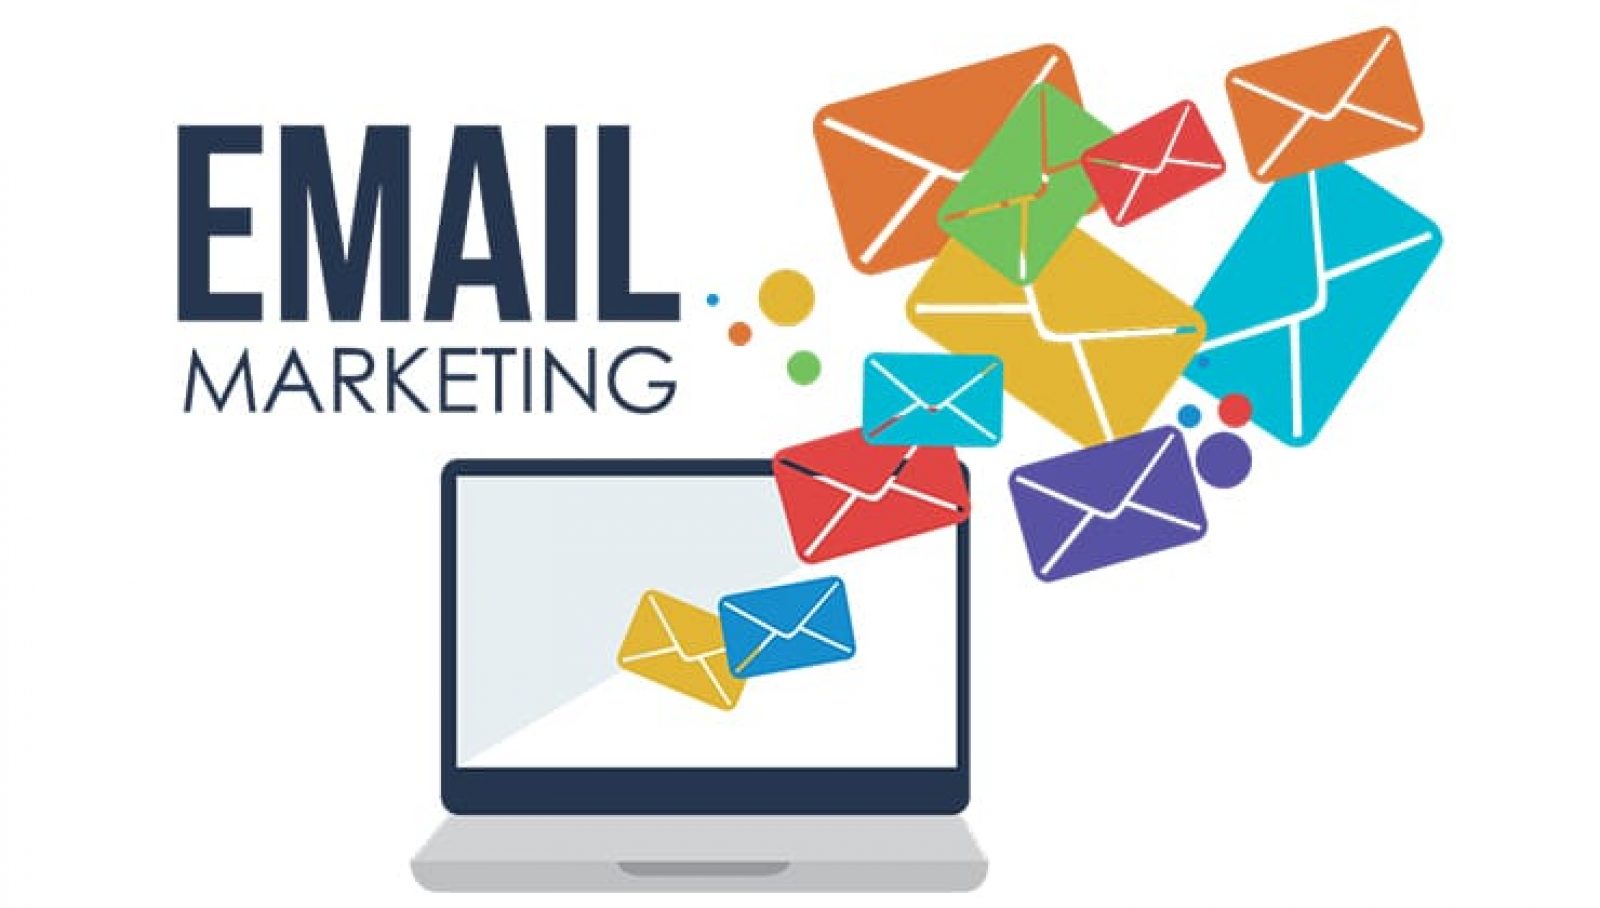 Email Marketing Is Not Dead: Here’s How You Can Get the Most Out of It